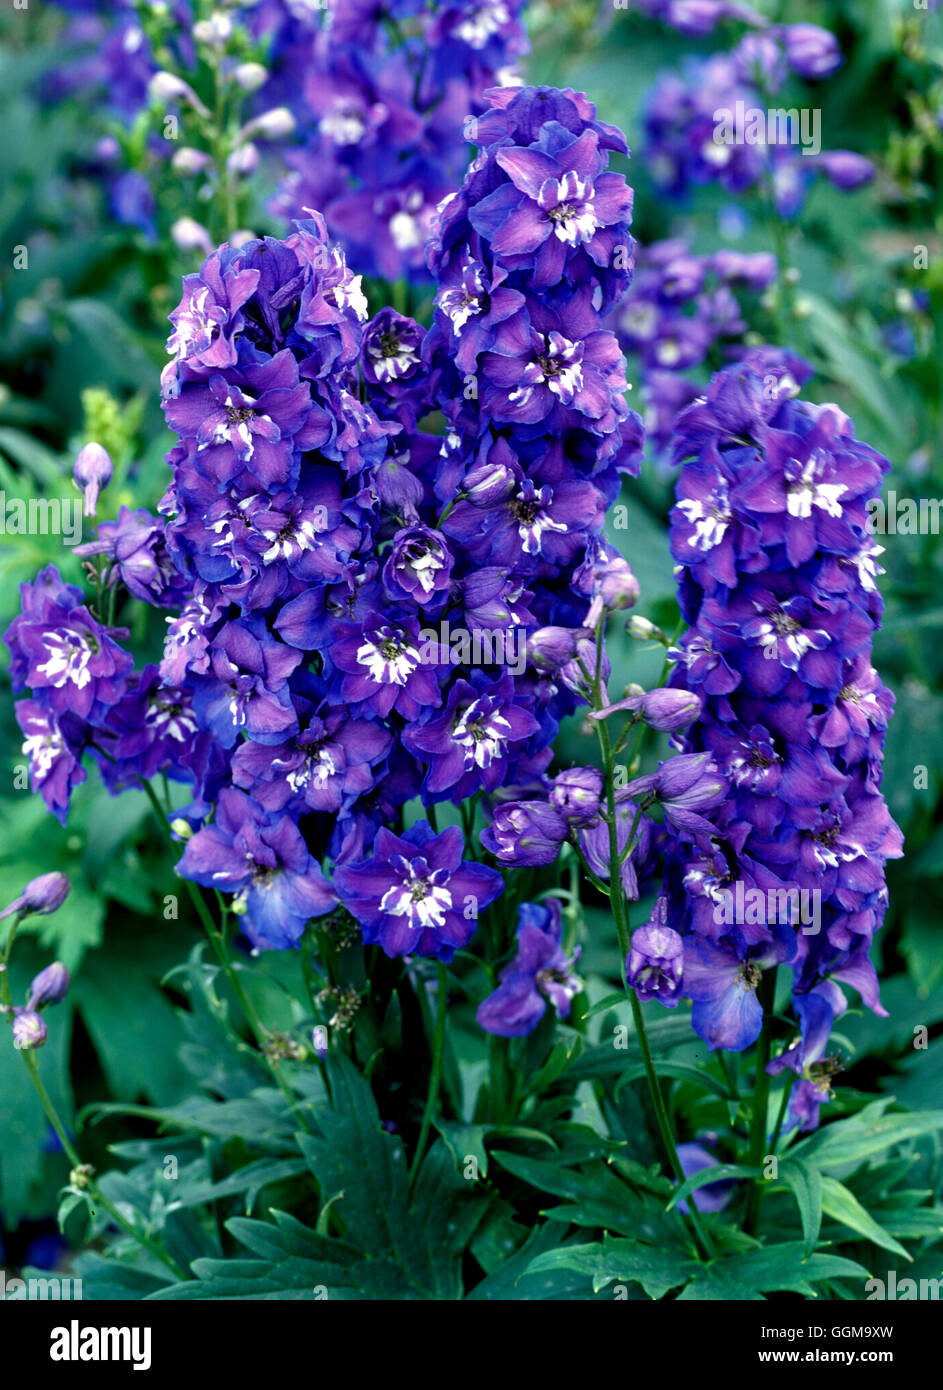 Delphinium Guardian Series - Early Blue  (Cut flower variety)  Date: 13/10/2008  Ref: UMW 122062 0004   Photos Stock Photo